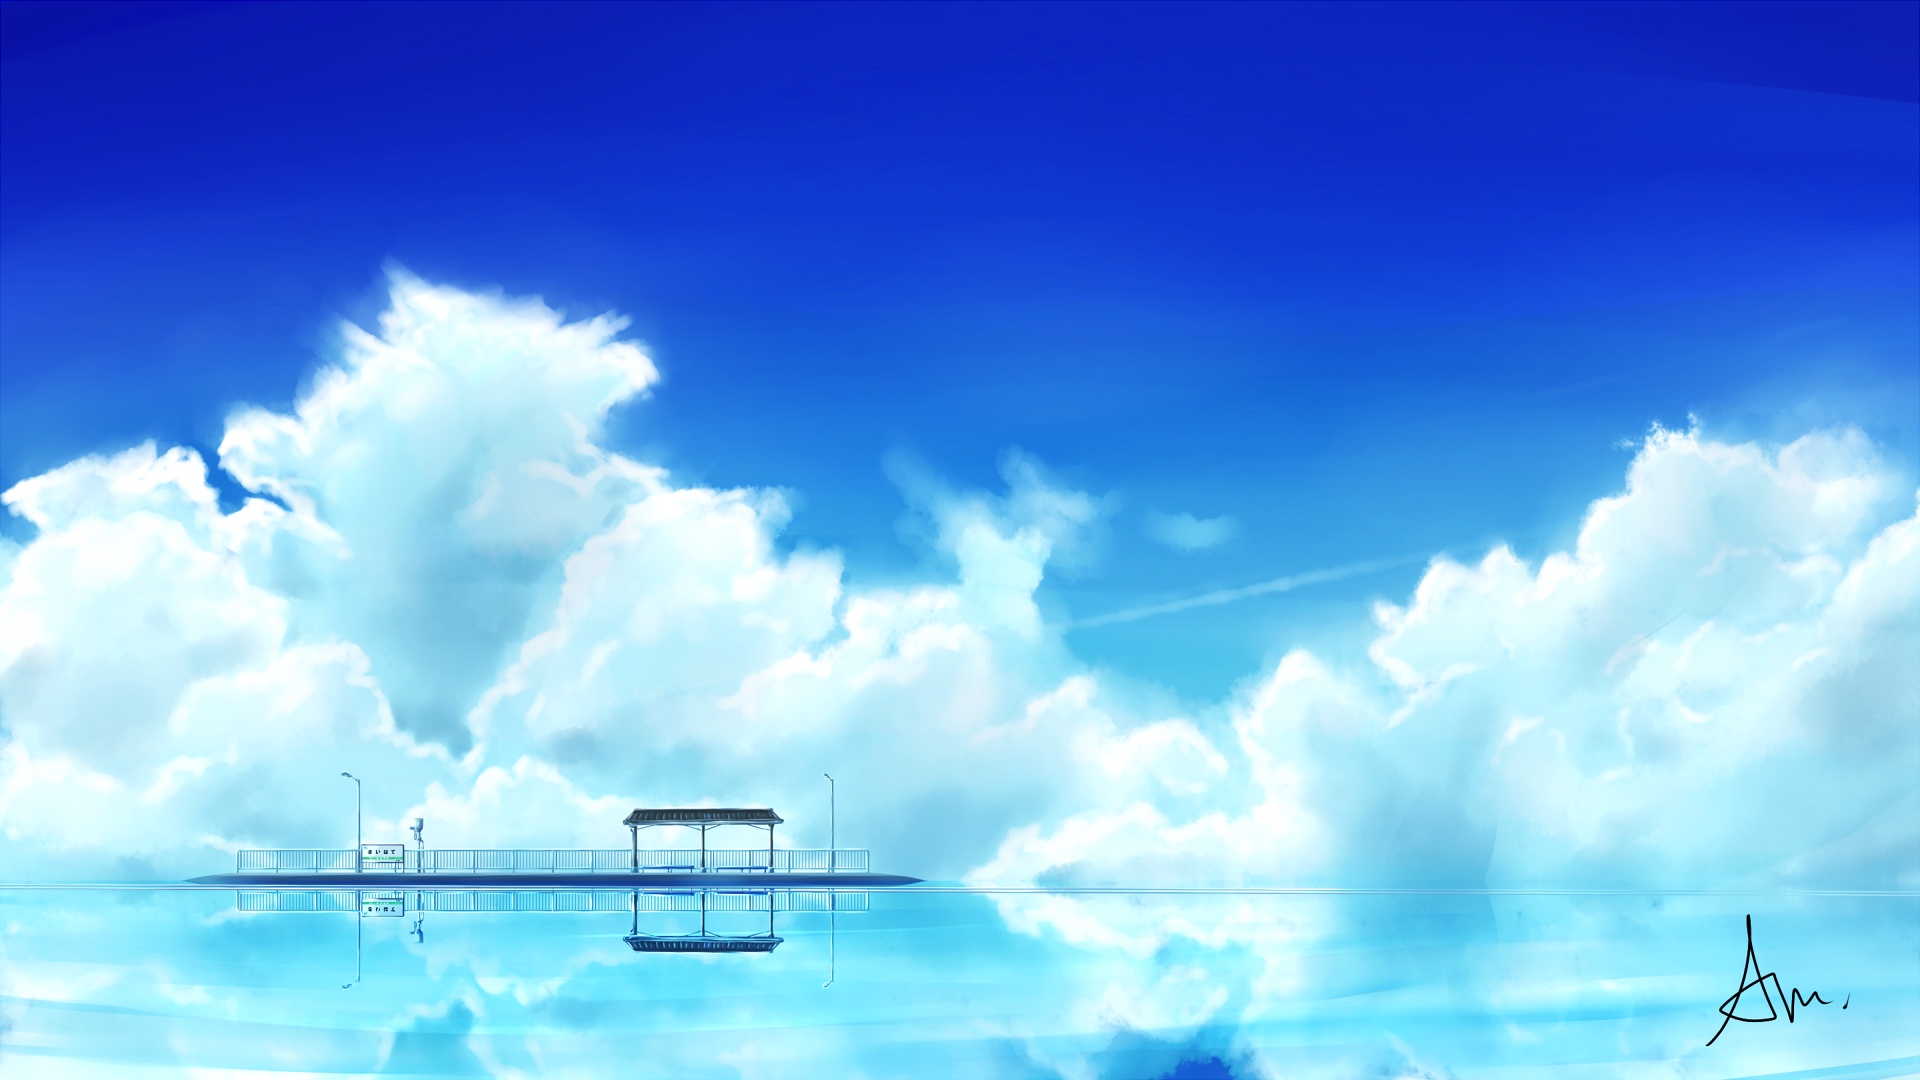 Wallpaper Anime Anime Art Anime Style Art Cloud Background  Download  Free Image